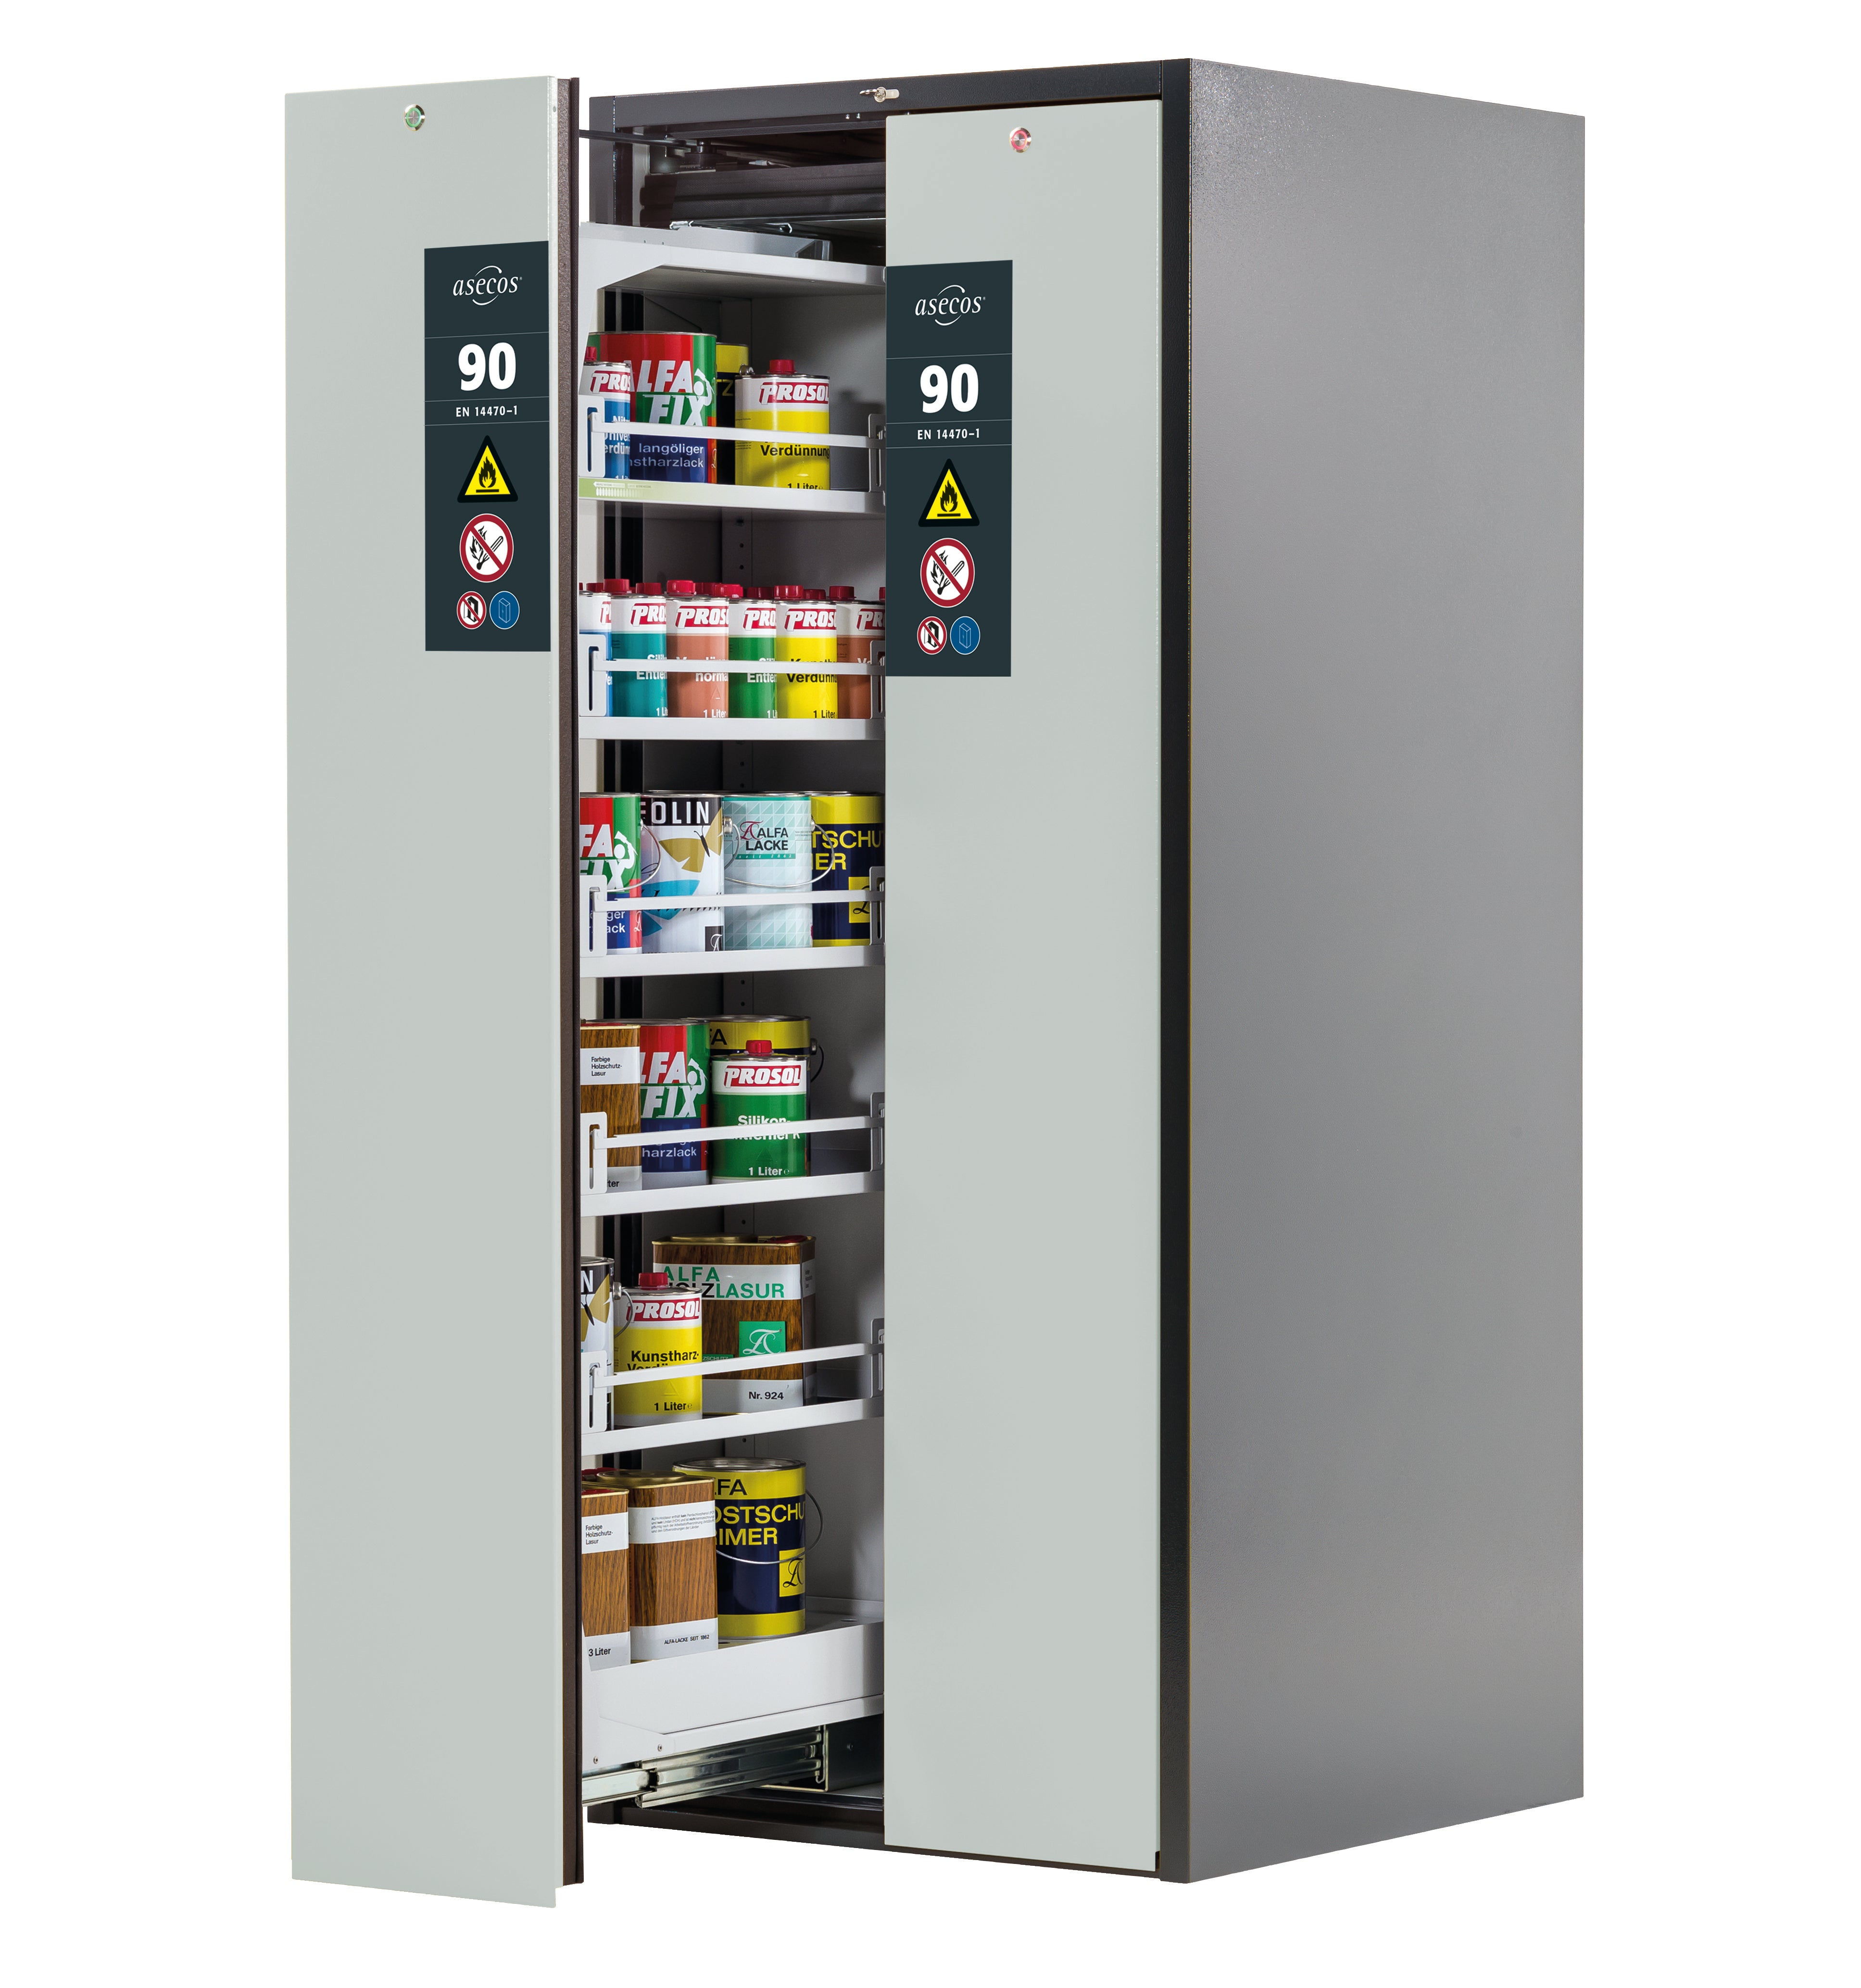 Type 90 safety cabinet V-MOVE-90 model V90.196.081.VDAC:0013 in light gray RAL 7035 with 5x standard shelves (sheet steel)